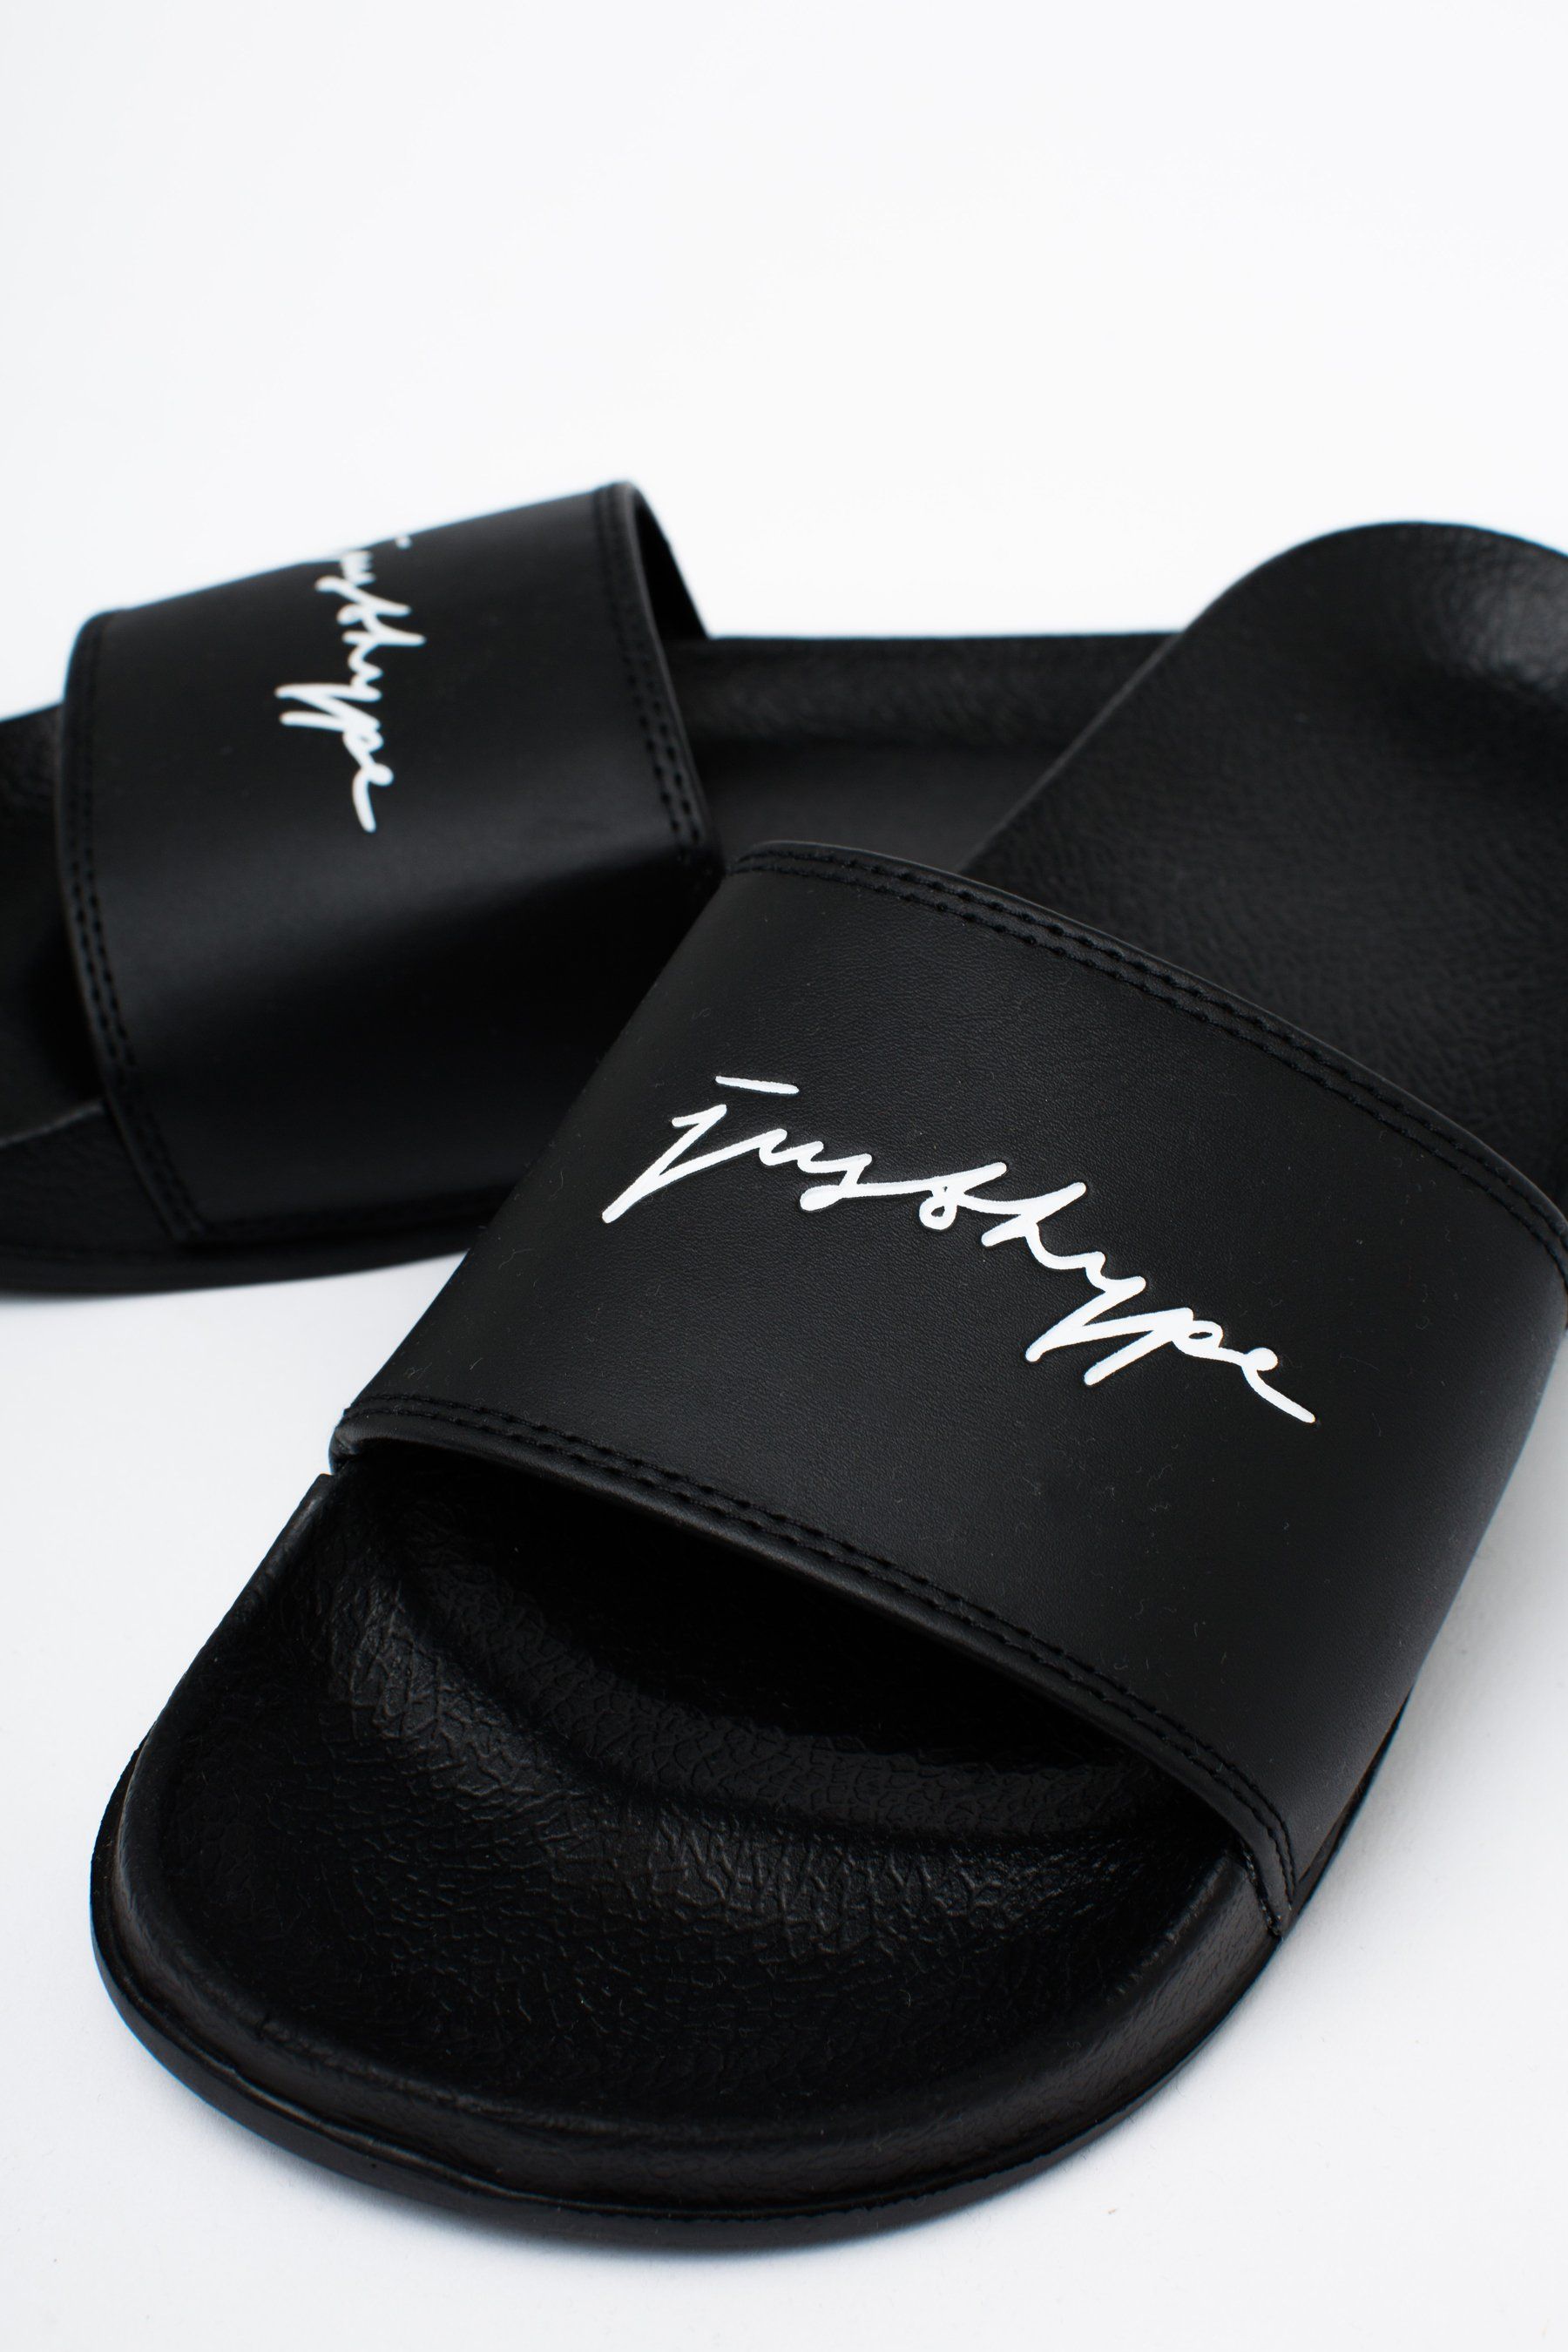 The ultimate footwear to take your comfort level from 0 - 100. The HYPE. men's black signature sliders feature a black base on the sole and crest. Designed in the upmost supreme amount of comfort finished with the just hype signature logo in a contrasting white. Wear around the pool with swim shorts or with a tracksuit set and ribbed crew socks for an off-duty style. Wipe clean only.